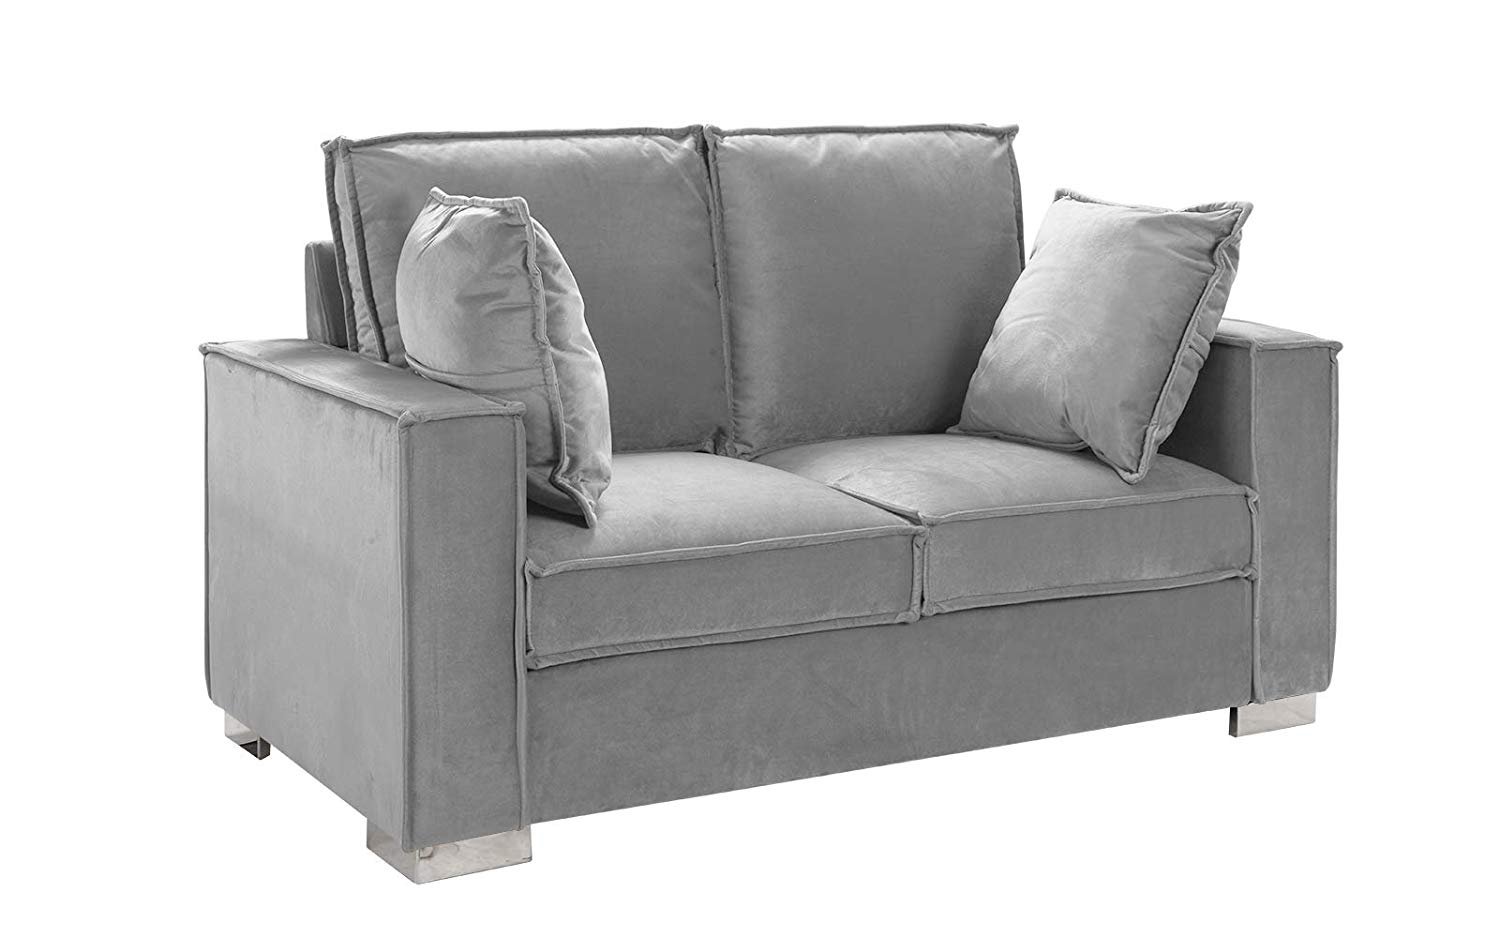 Classic Brush Microfiber Sofa, Small Space Loveseat Couch (Light